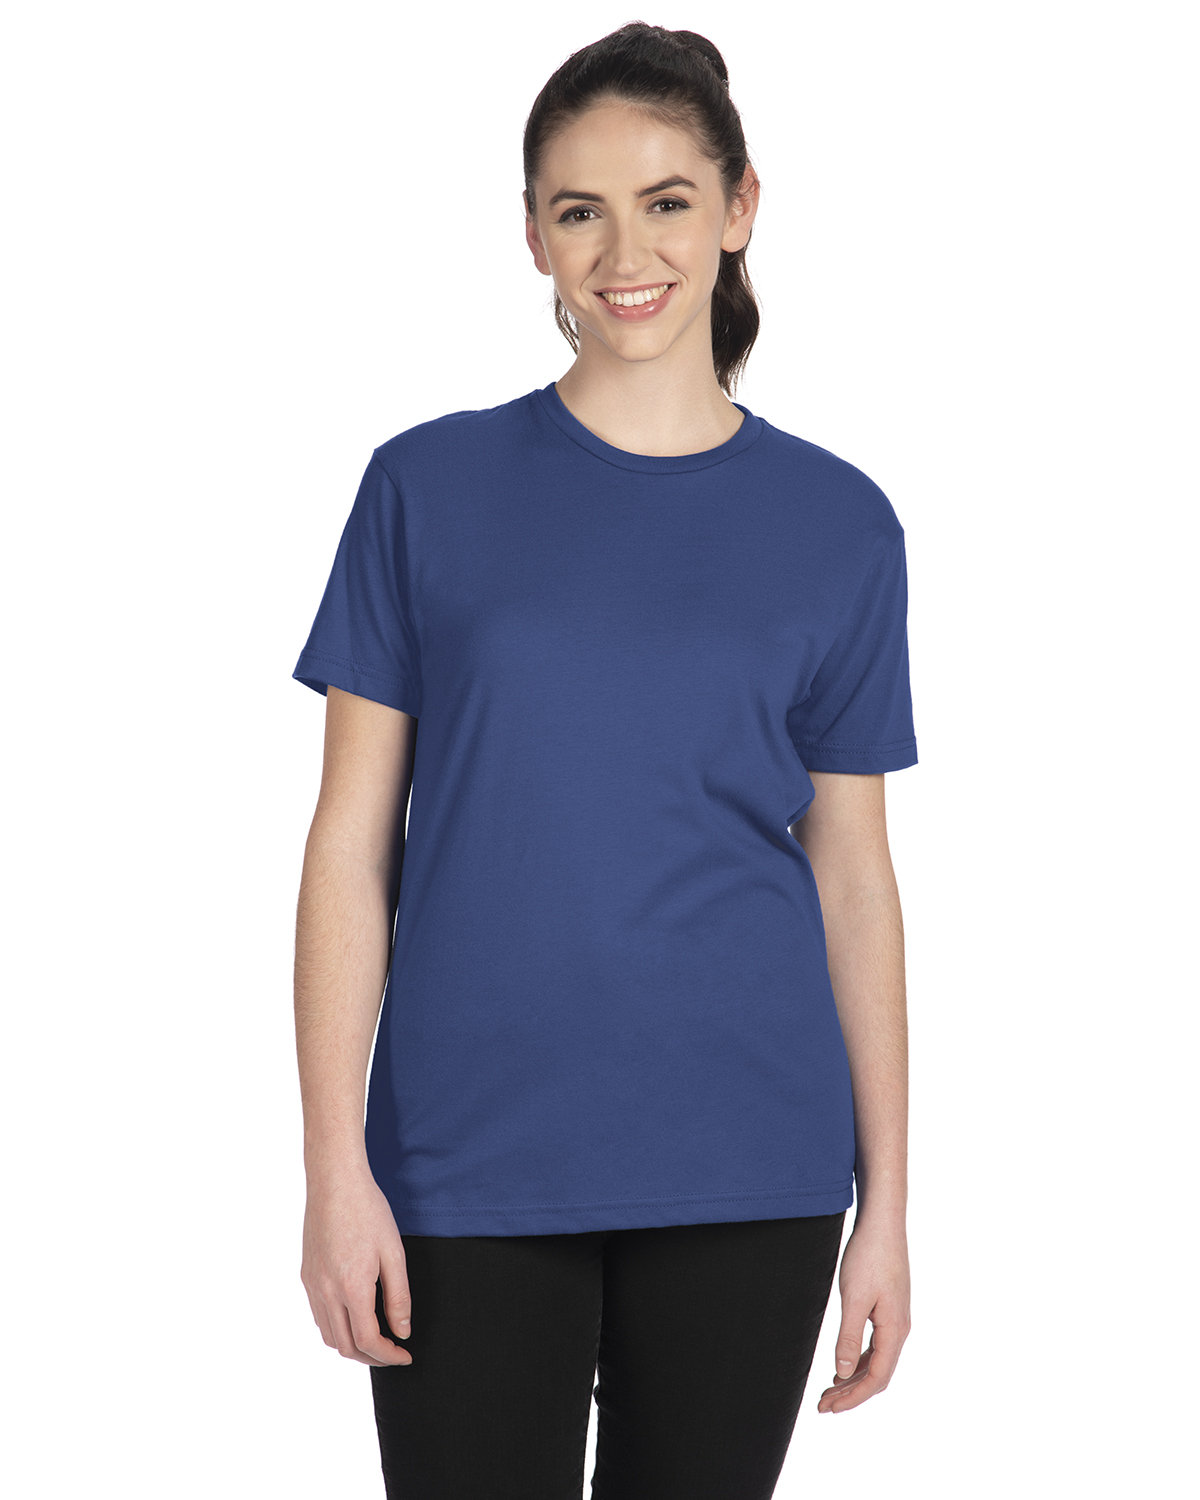 Next Level Apparel 6410 60/40 Cotton/Polyester Sueded Unisex T